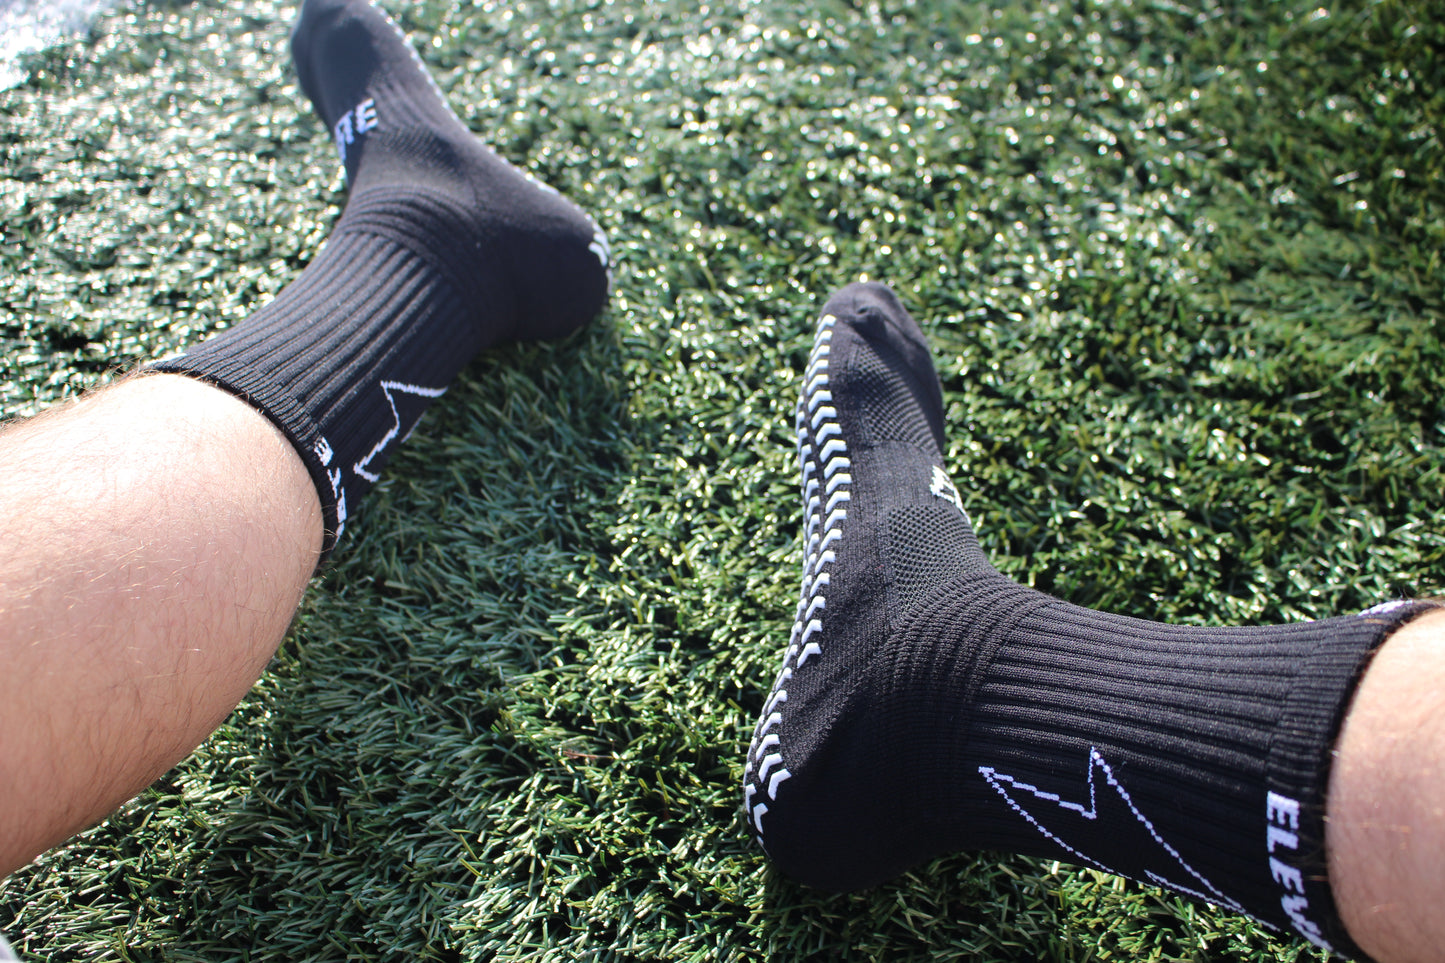 Elevate Grip Socks - Black with white grips.